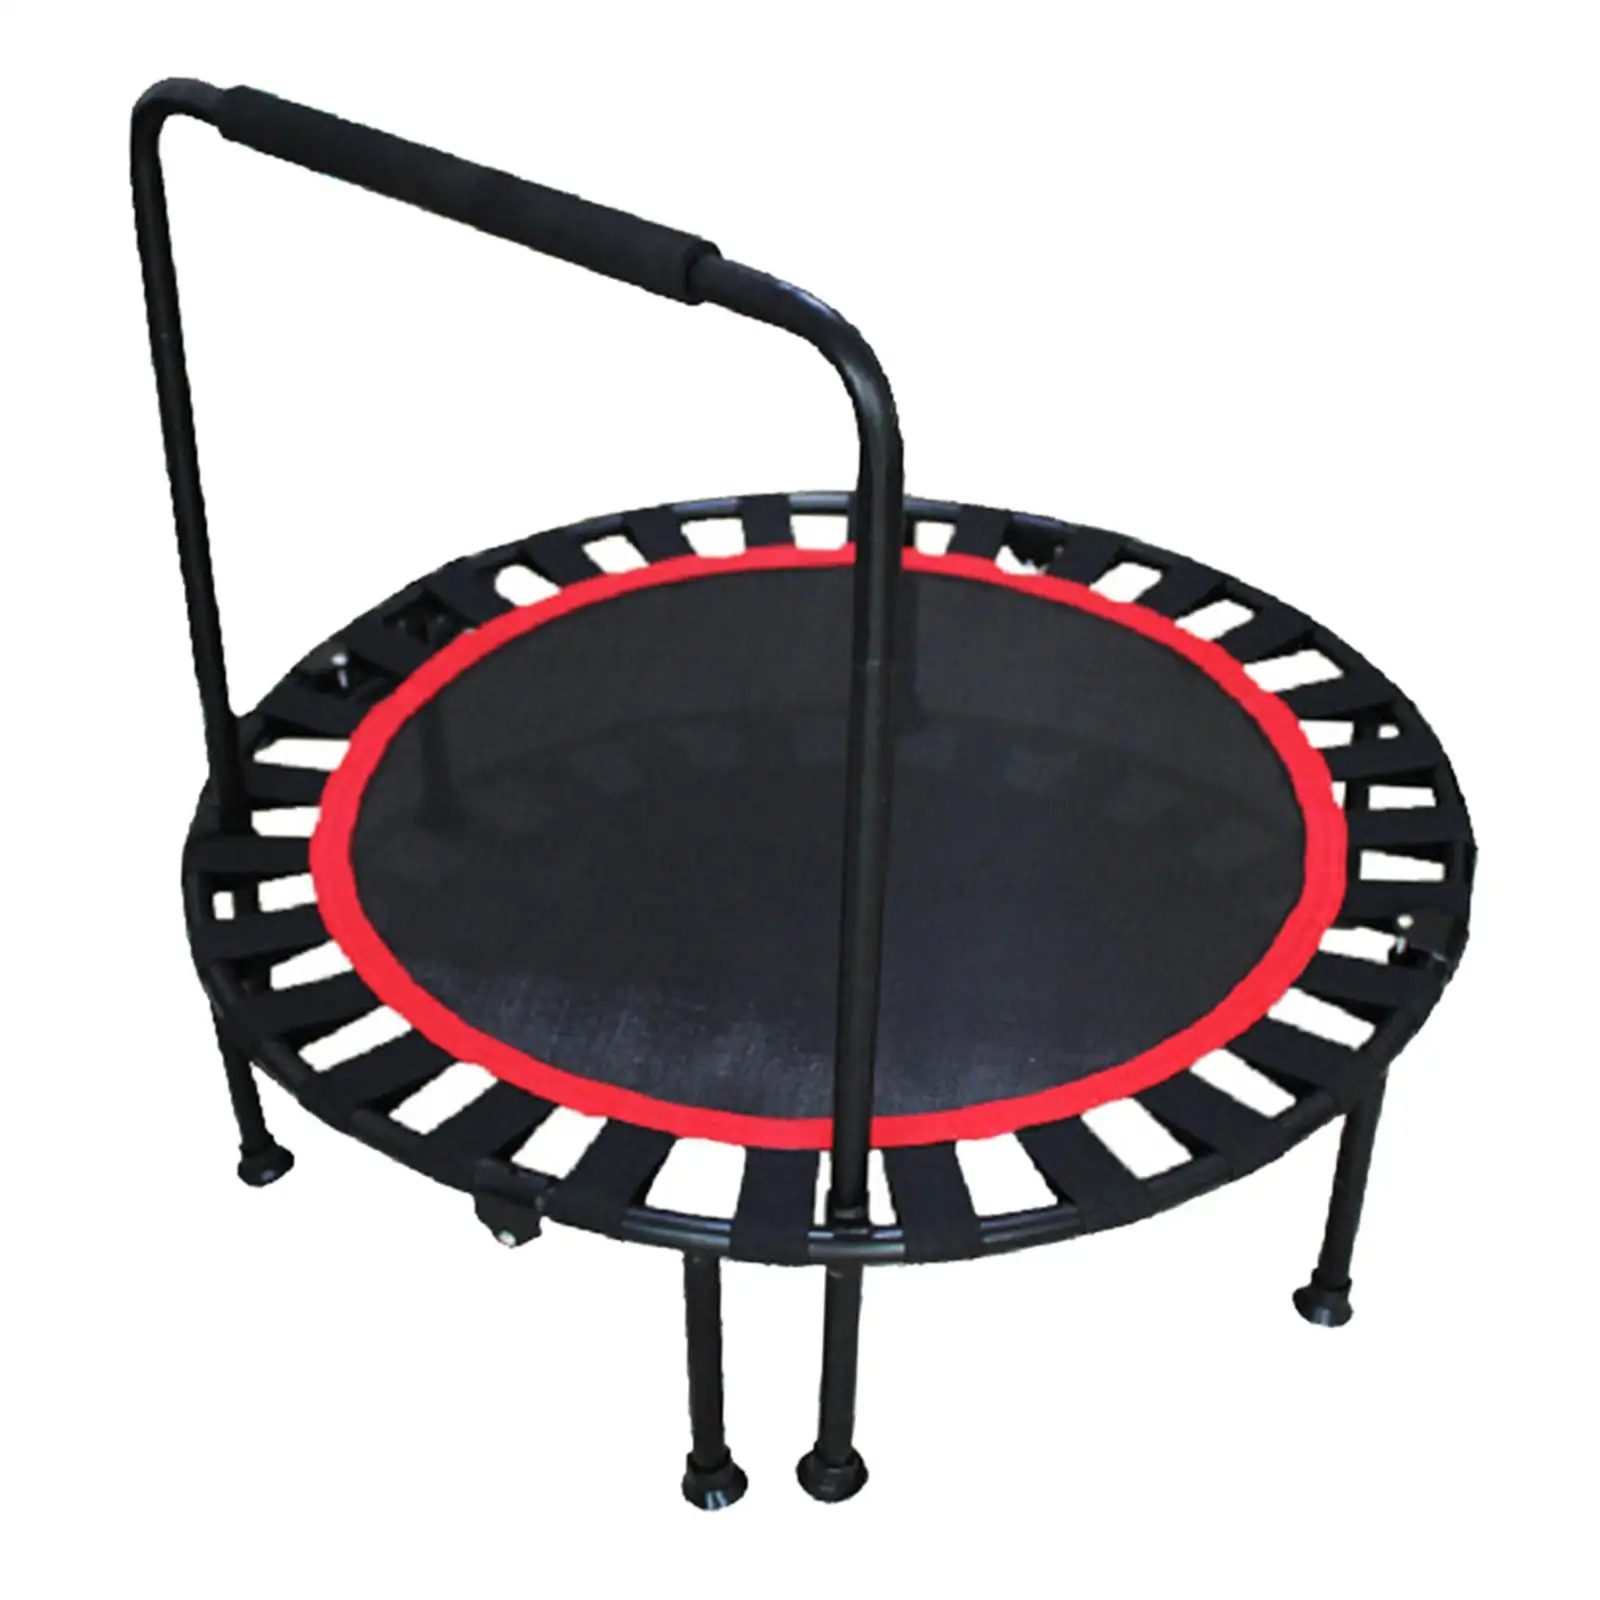 Jumping Mat Exercise Playing Water Resistant Indoor Outdoor Safety Round